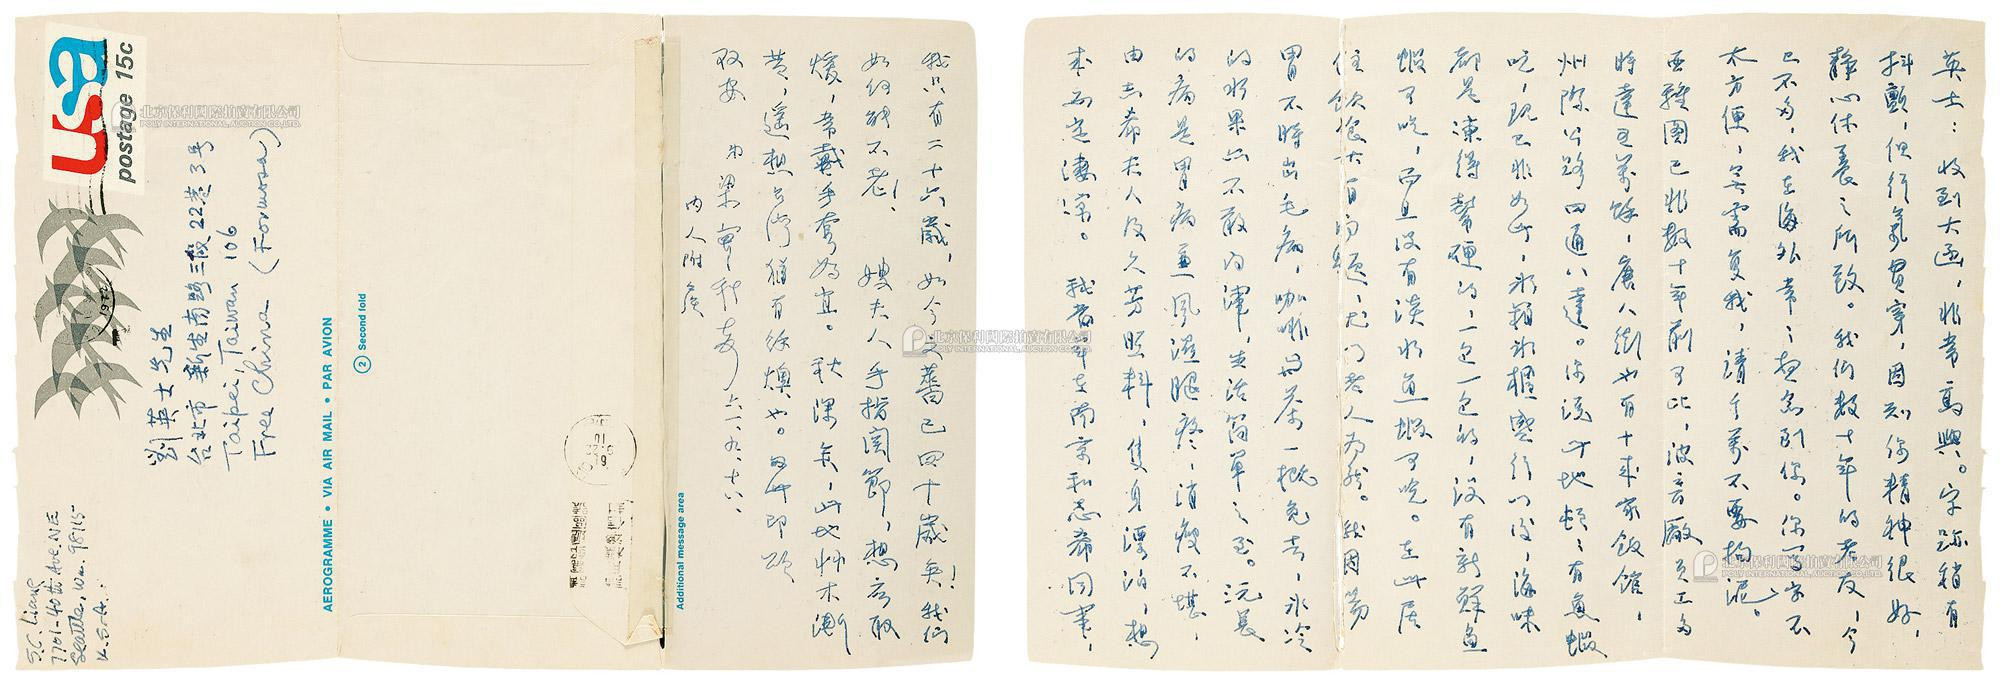 One letter of one page by Liang Shiqiu to Liu Yingshi